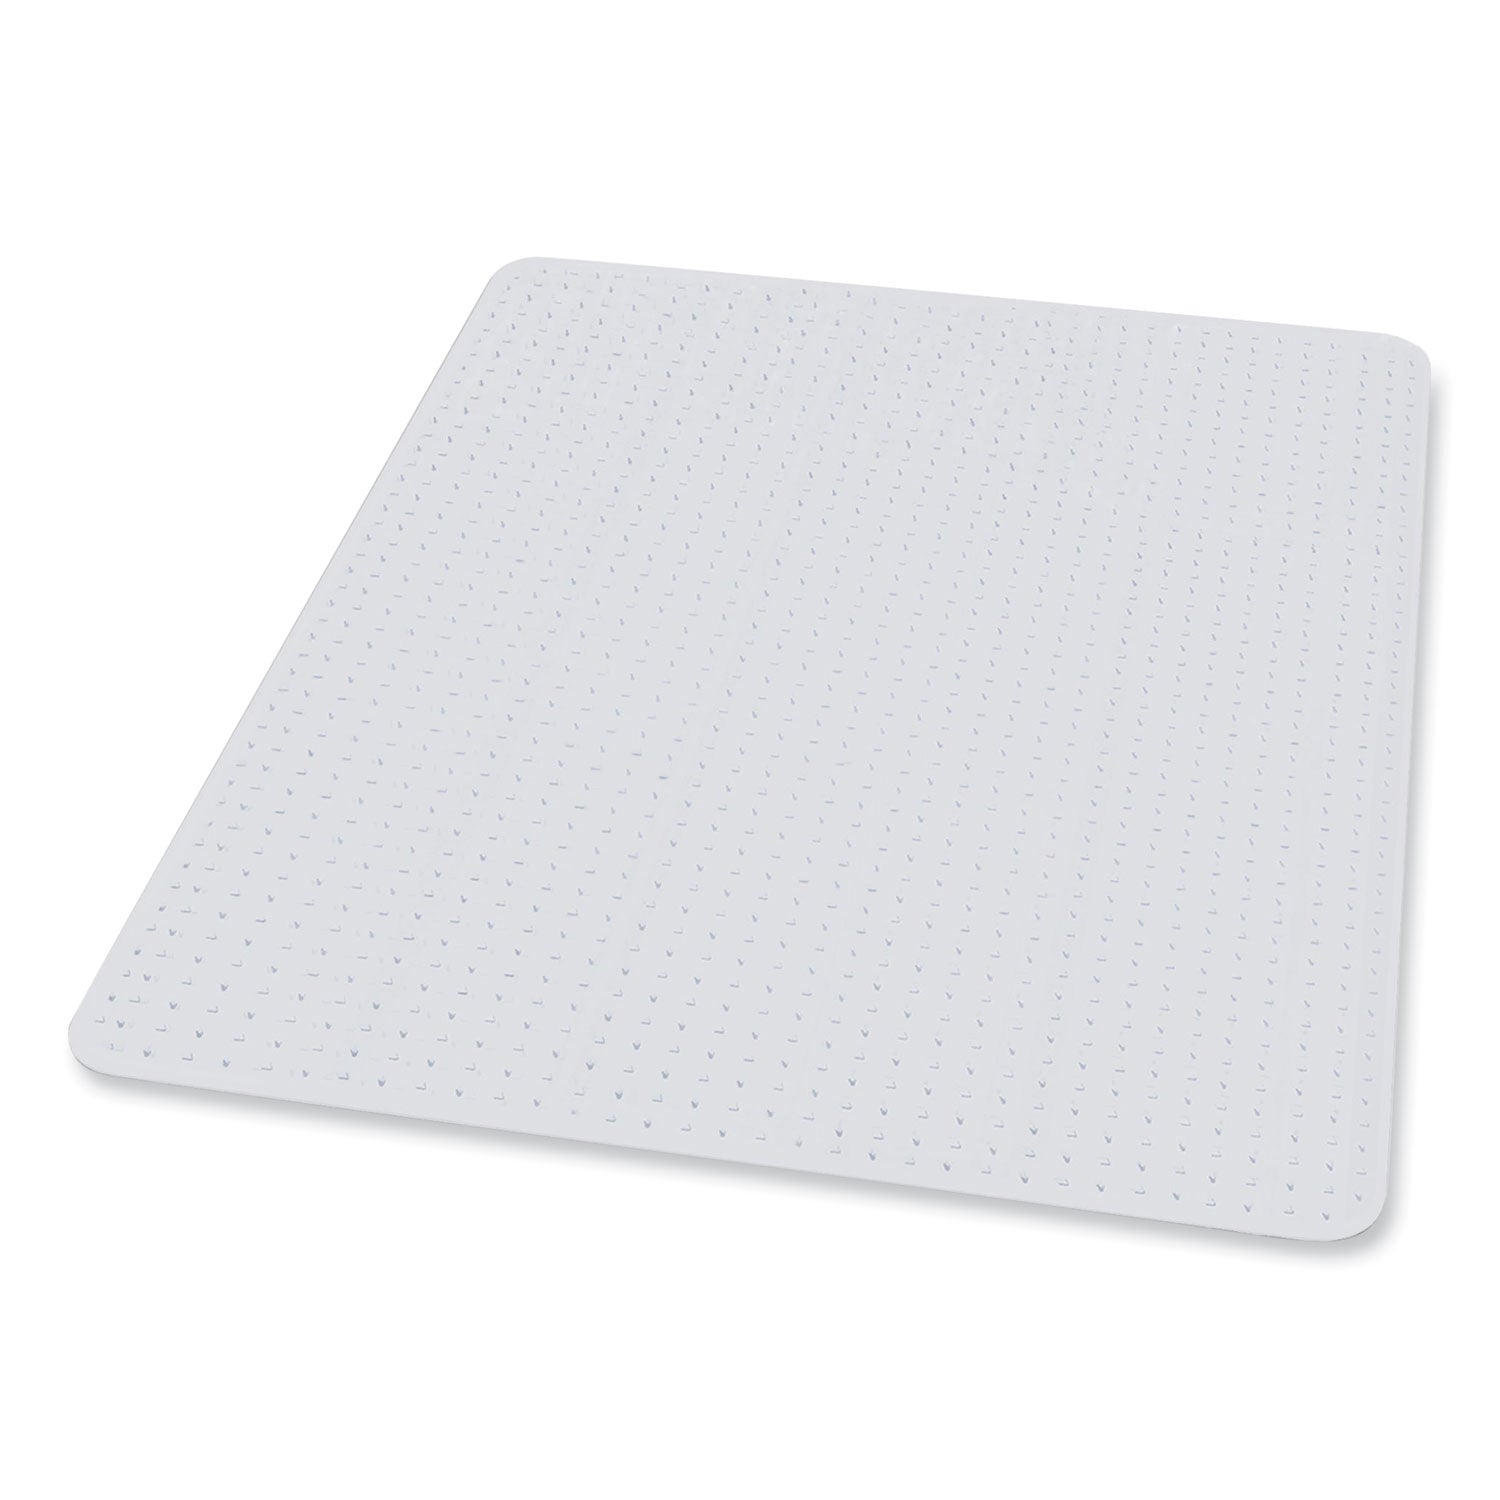 everlife-chair-mat-for-medium-pile-carpet-60-x-72-clear-ships-in-4-6-business-days_esr122781 - 1